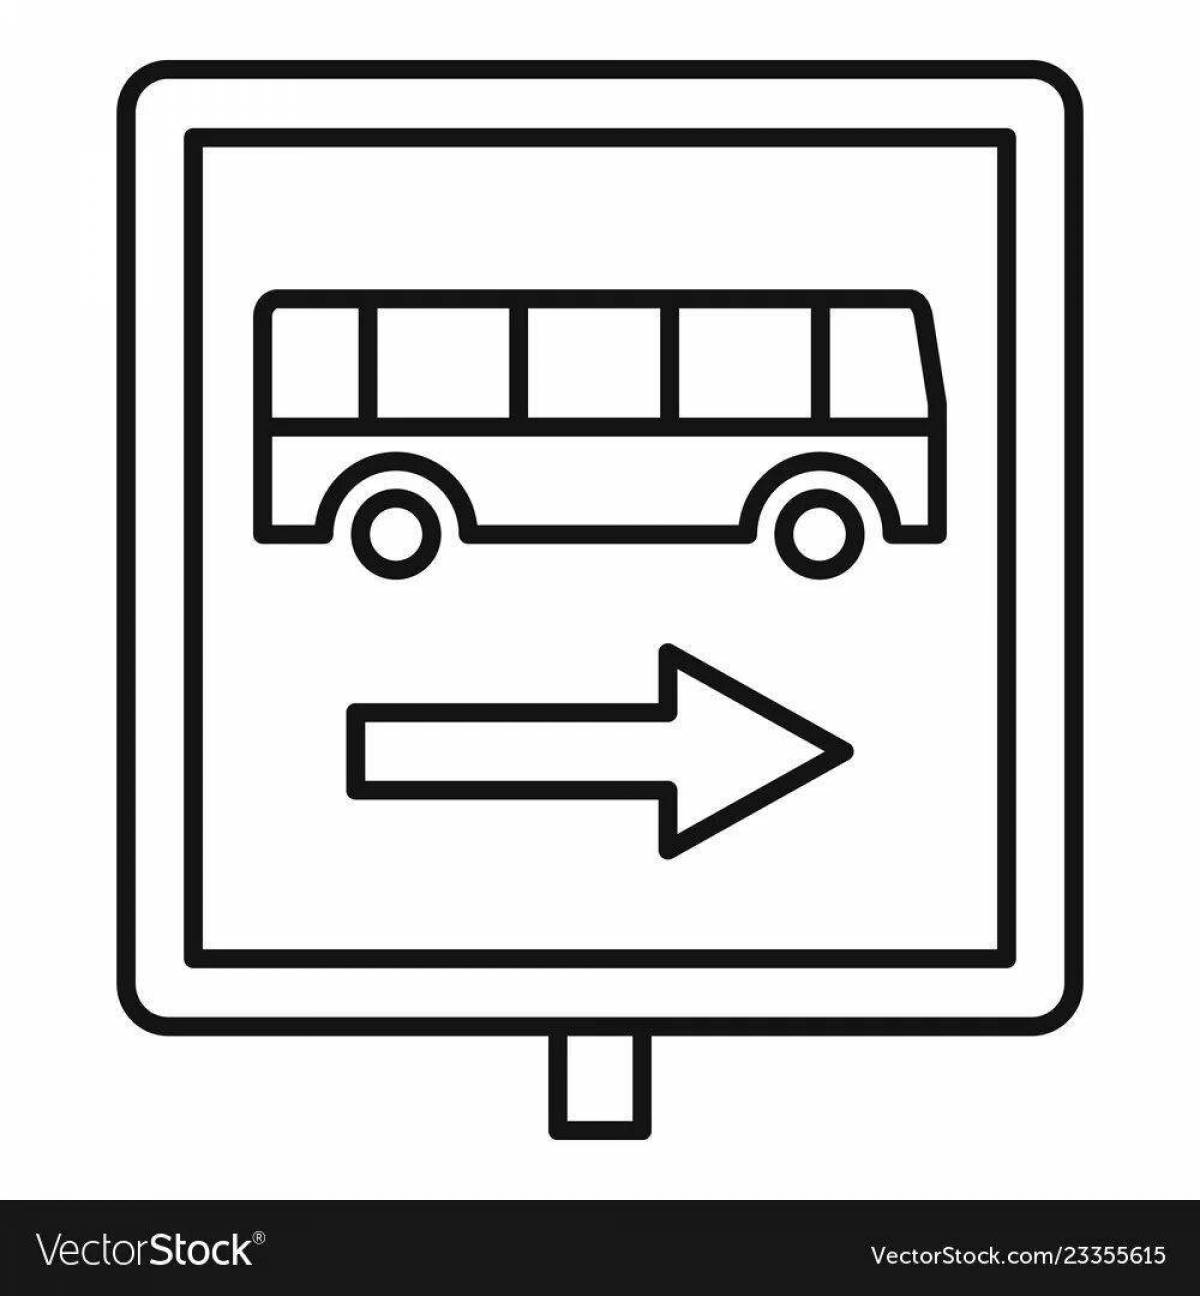 Coloring page bright bus stop sign